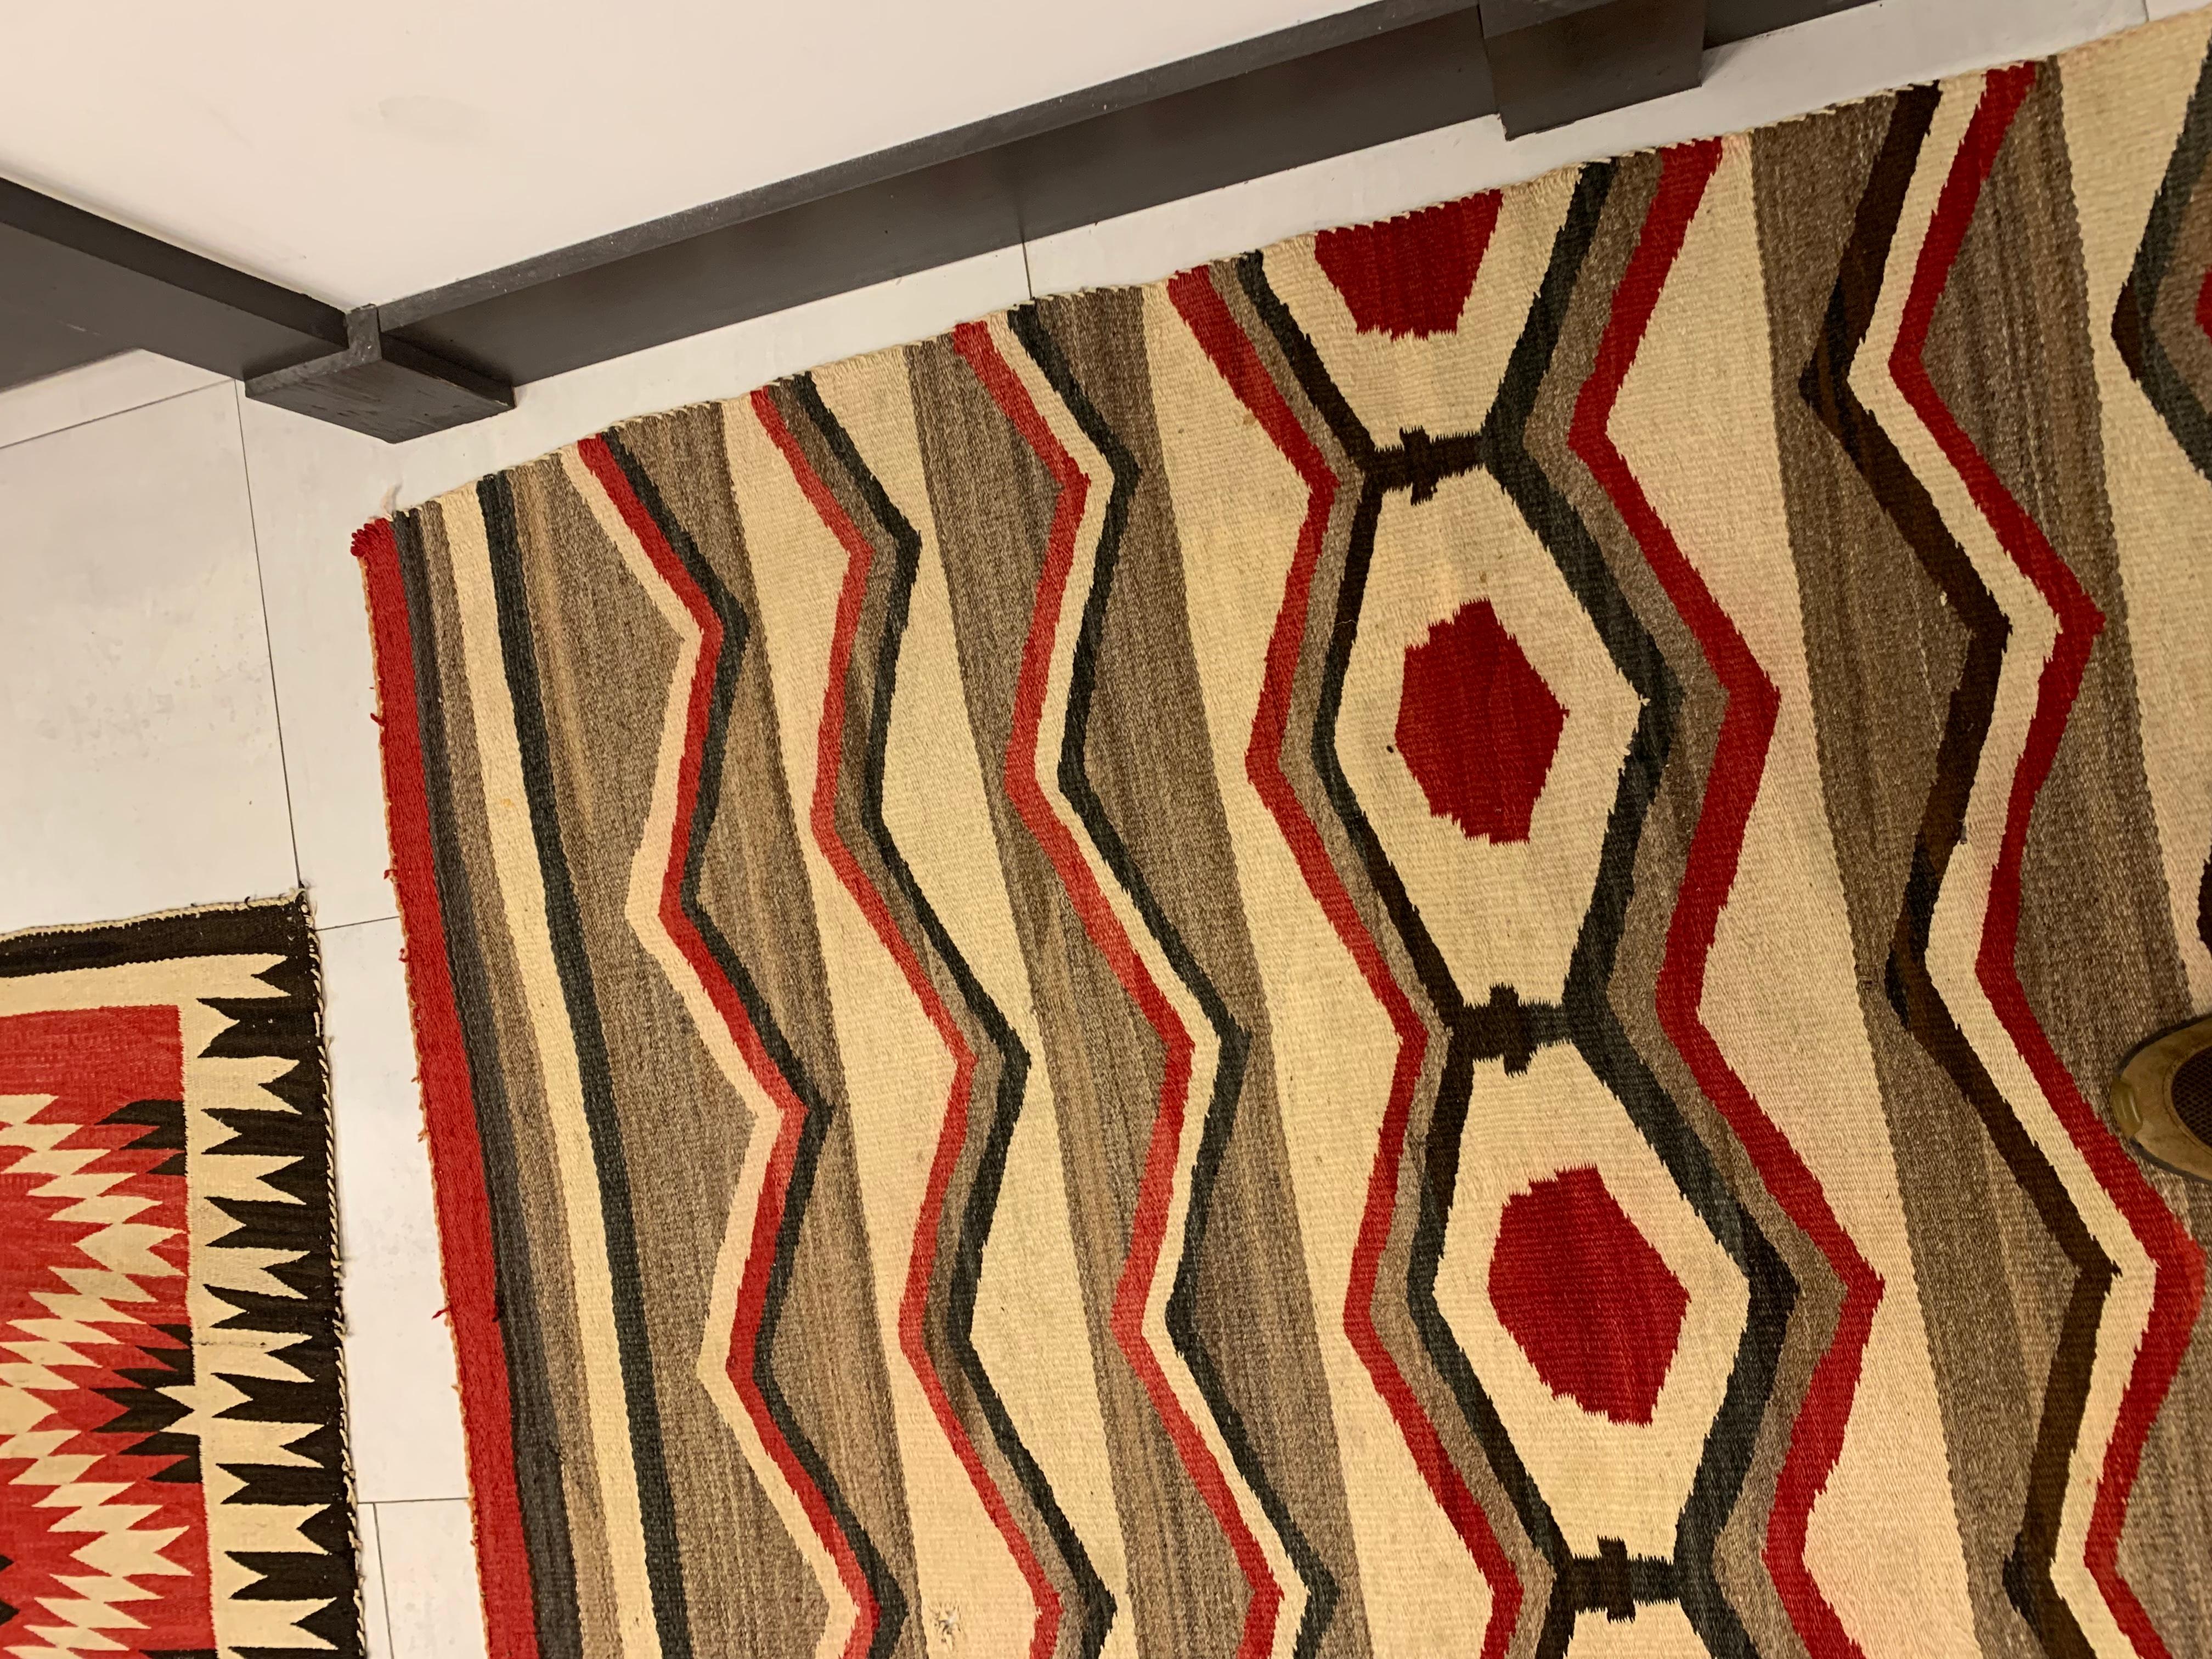 Hand-Knotted Handmade Antique Native American Navajo Rug Blanket 4.6' x 5.4', 1900s - 2B22 For Sale